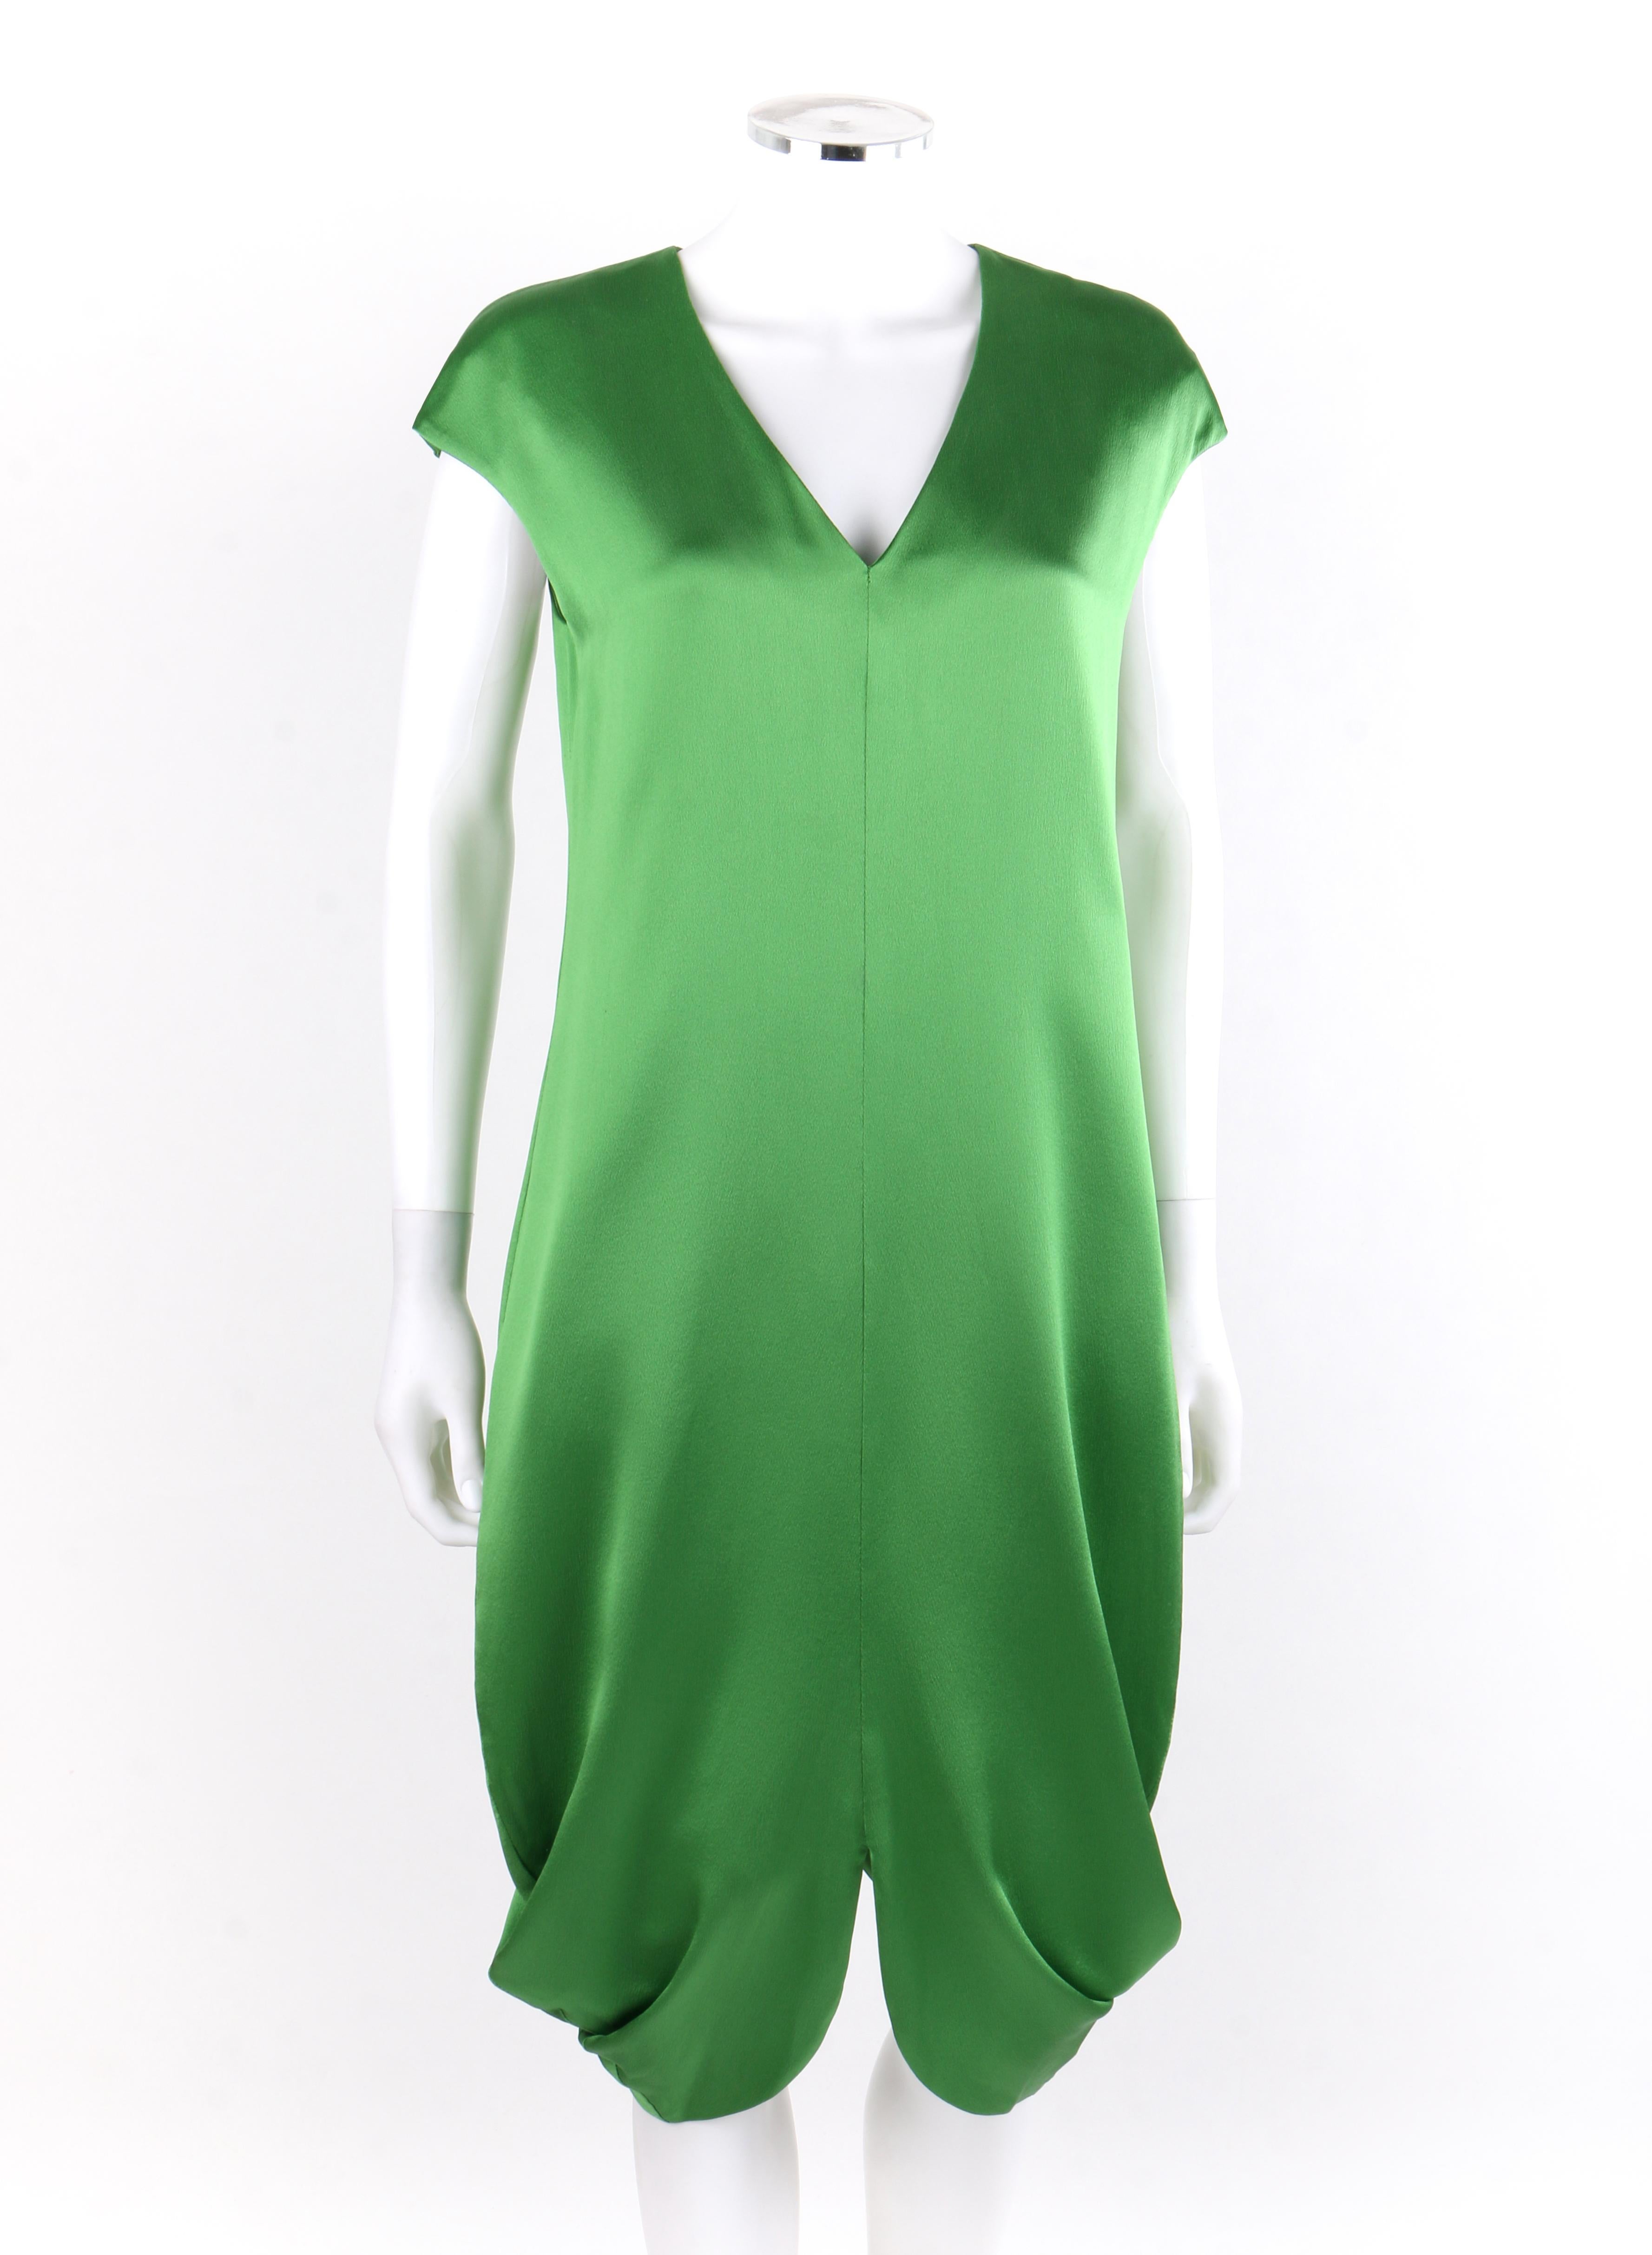 ALEXANDER McQUEEN S/S 2009 Green Silk Cap Sleeve Cowl Draped Shift Dress NWT
  
Brand / Manufacturer: Alexander McQueen
Collection: Spring / Summer 2009 
Style: Shift dress
Color(s): Green 
Lined: Yes
Marked Fabric Content: 100% seta silk